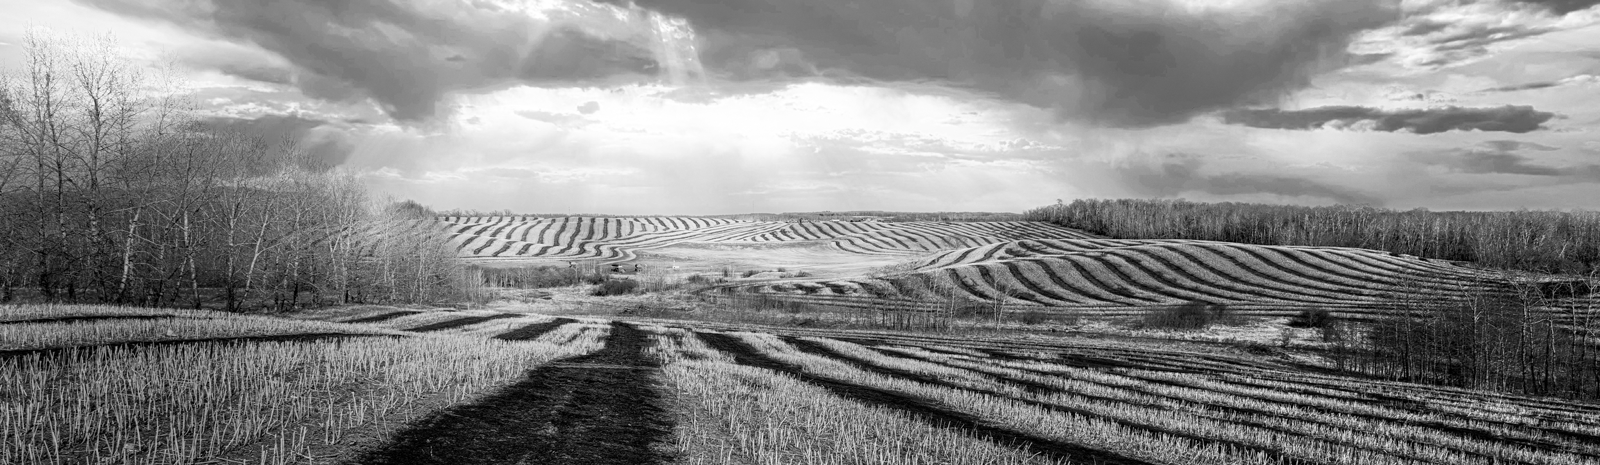 Black and white image of harvested wheat field